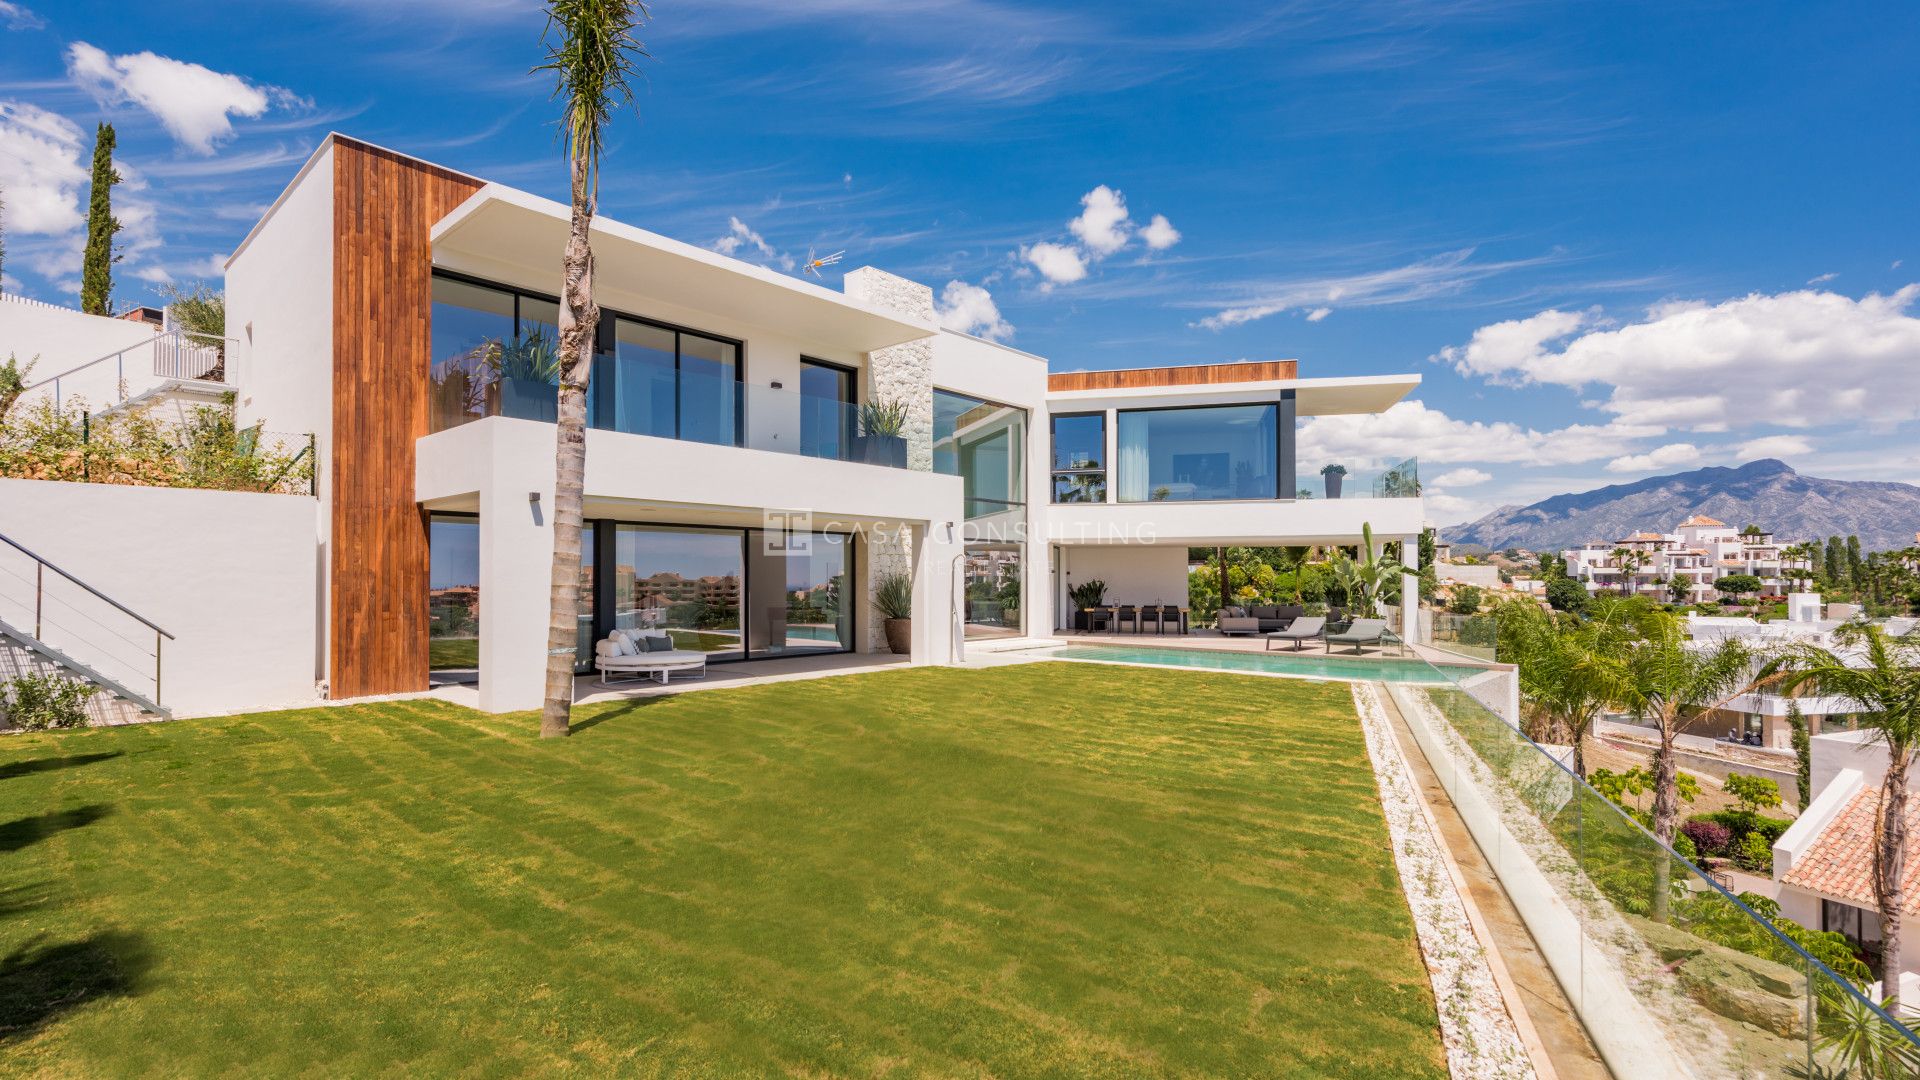 Spectacular 6 bedroom contemporary villa with amazing panoramic views in La A...